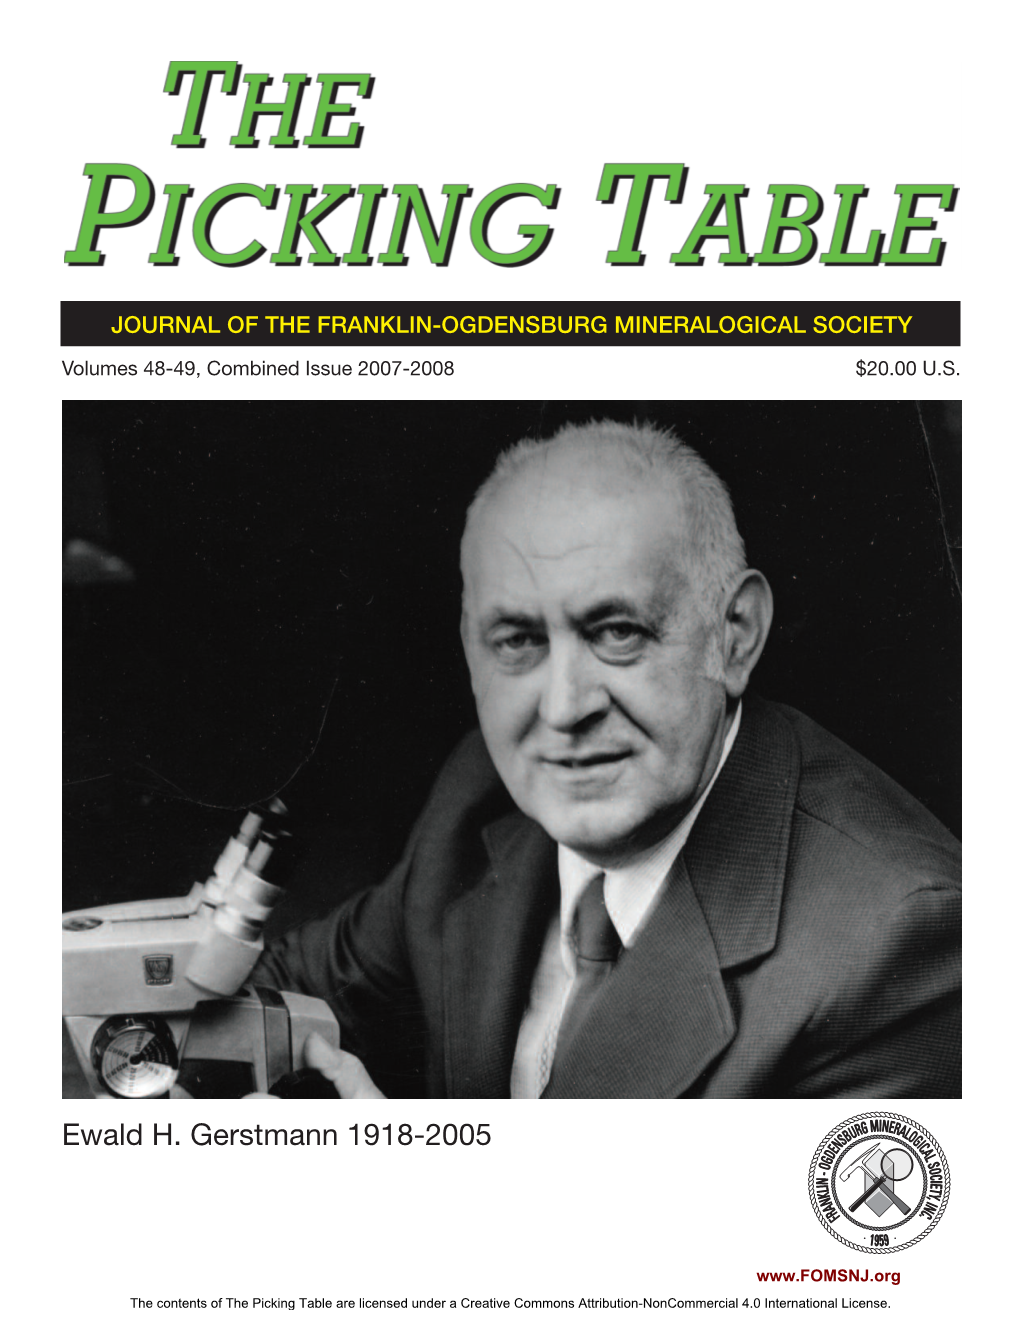 The Picking Table Volumes 48-49, Combined Issue 2007-2008